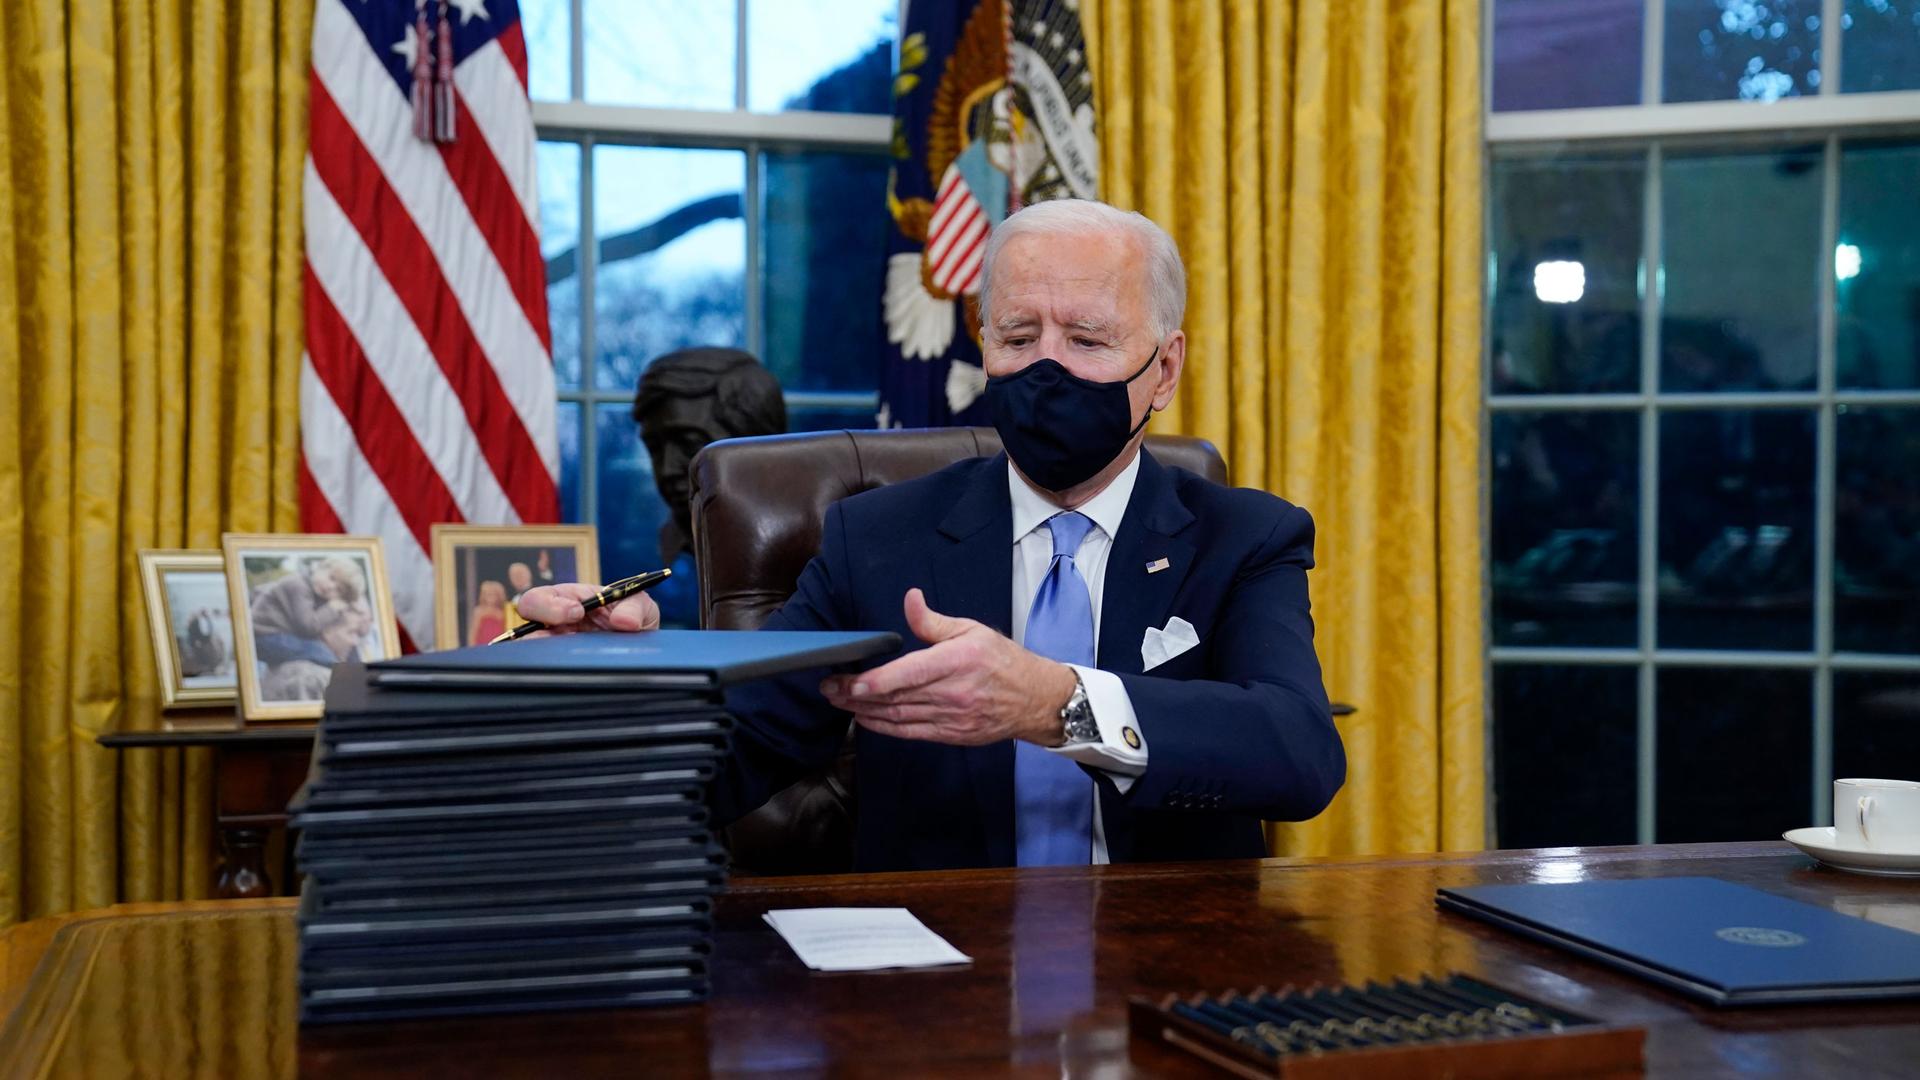 US President Joe Biden is shown seated at a wooden desk with a tall stack of embossed folders next to him.